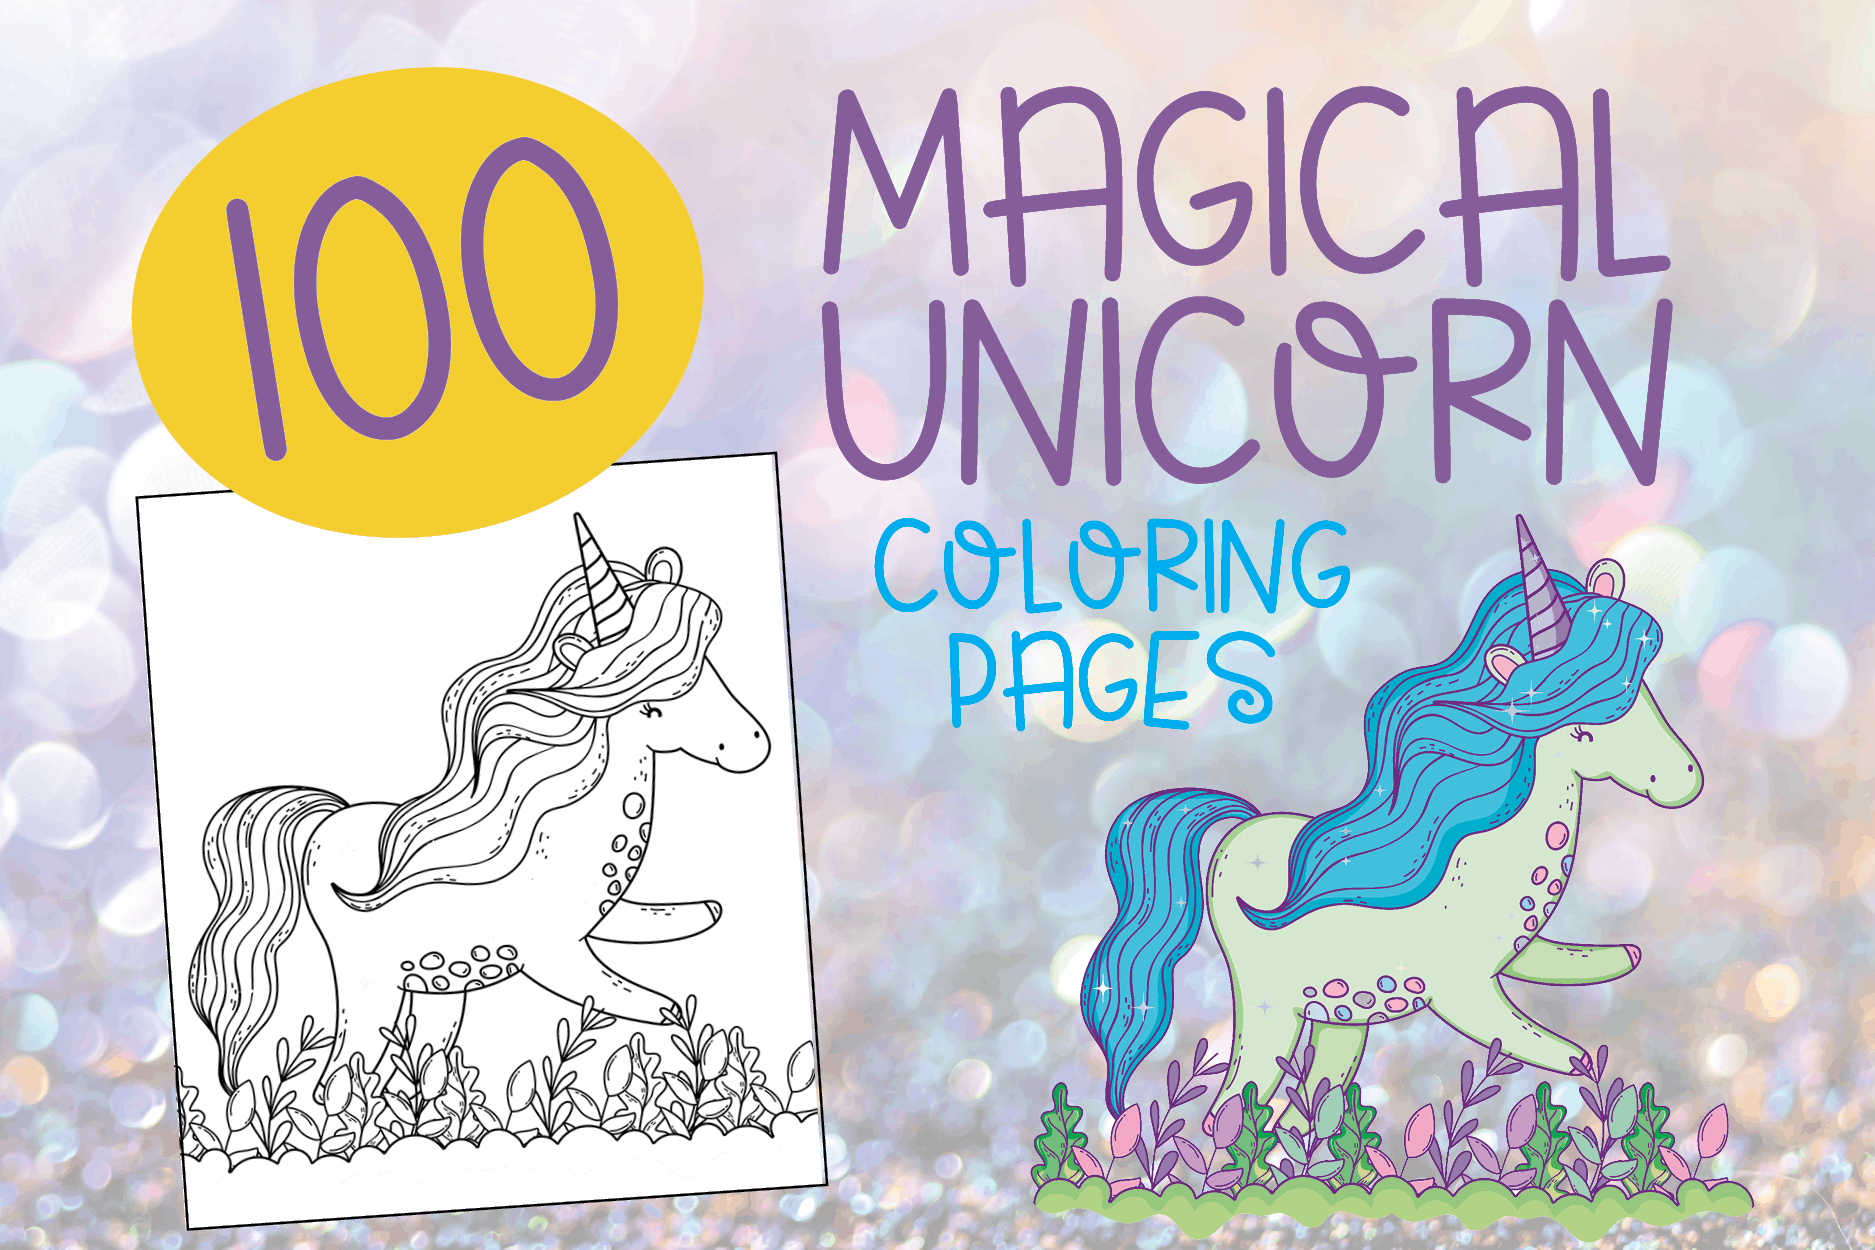 Unicorno Coloring Pages Top 100 Magical Unicorn Coloring Pages The Ultimate Free